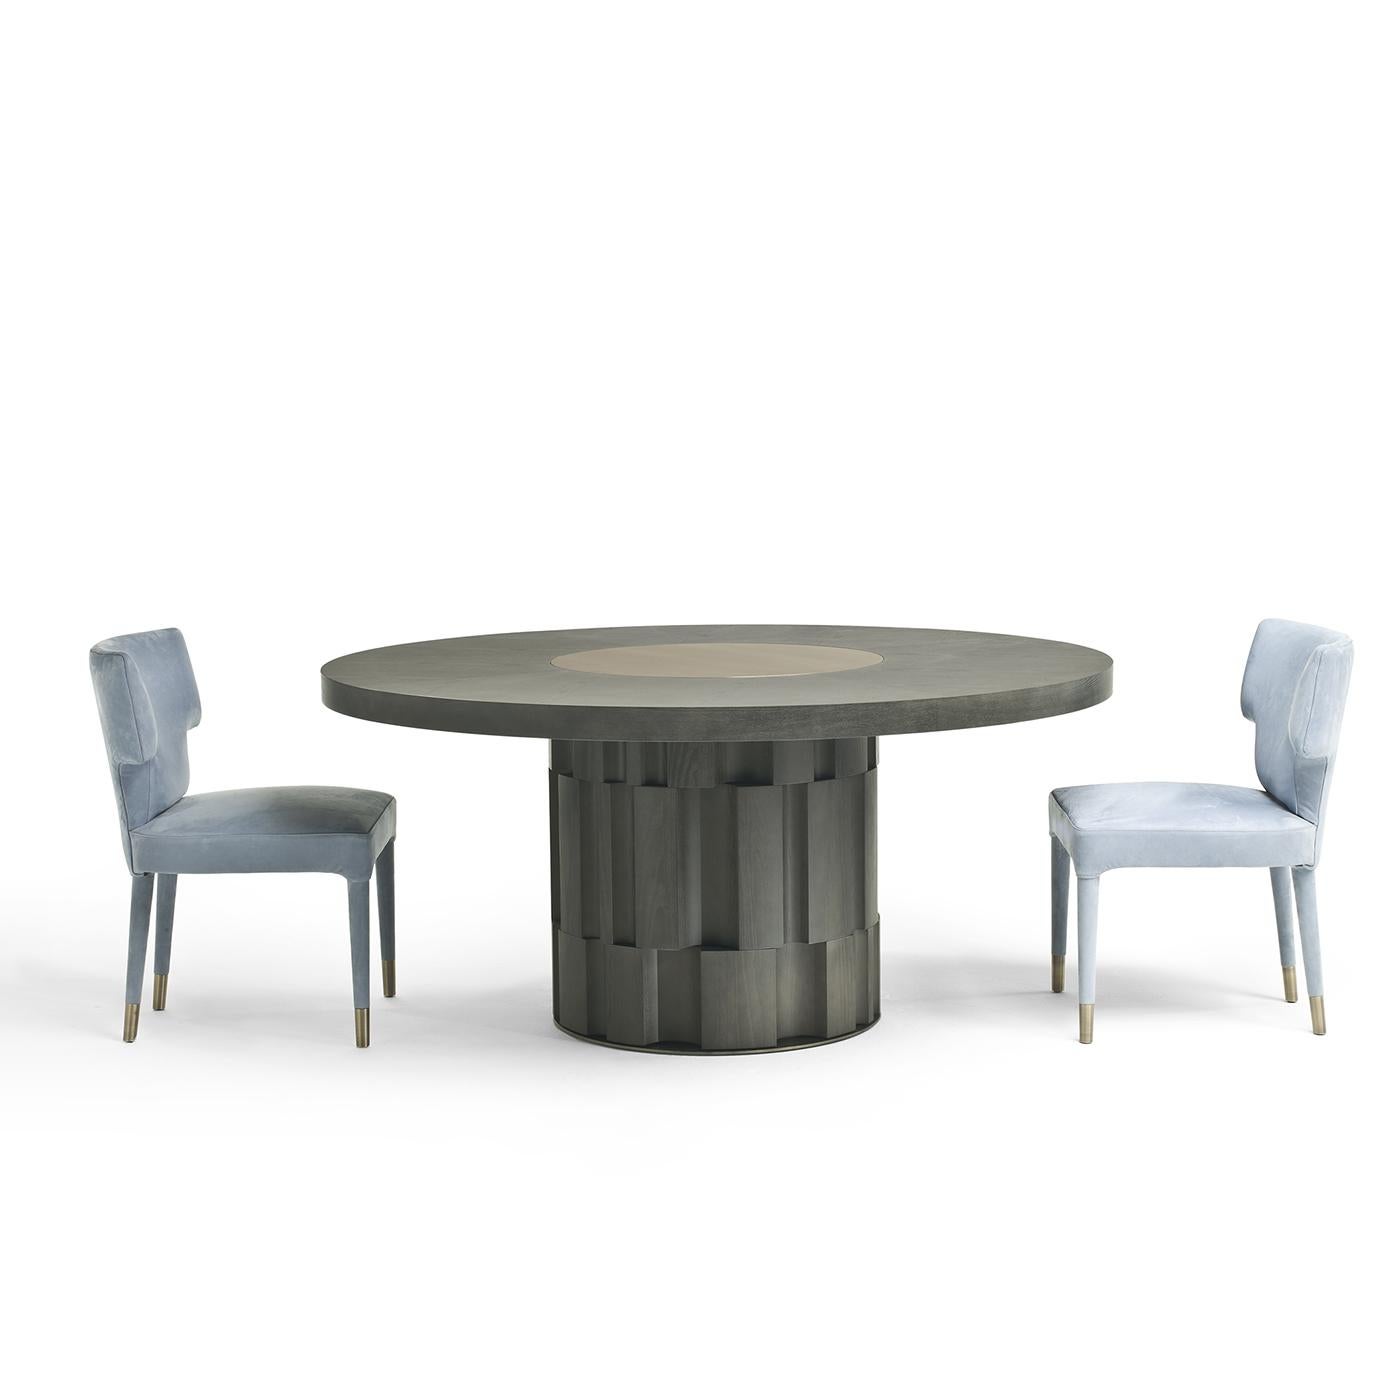 Make a strong style statement in a contemporary dining space with the Atmos Dining Table. On a solid open-pore oak base with a black finish, the table has a round top featuring a chic lazy Susan in bronze-plated brass. Pair the table with minimalist